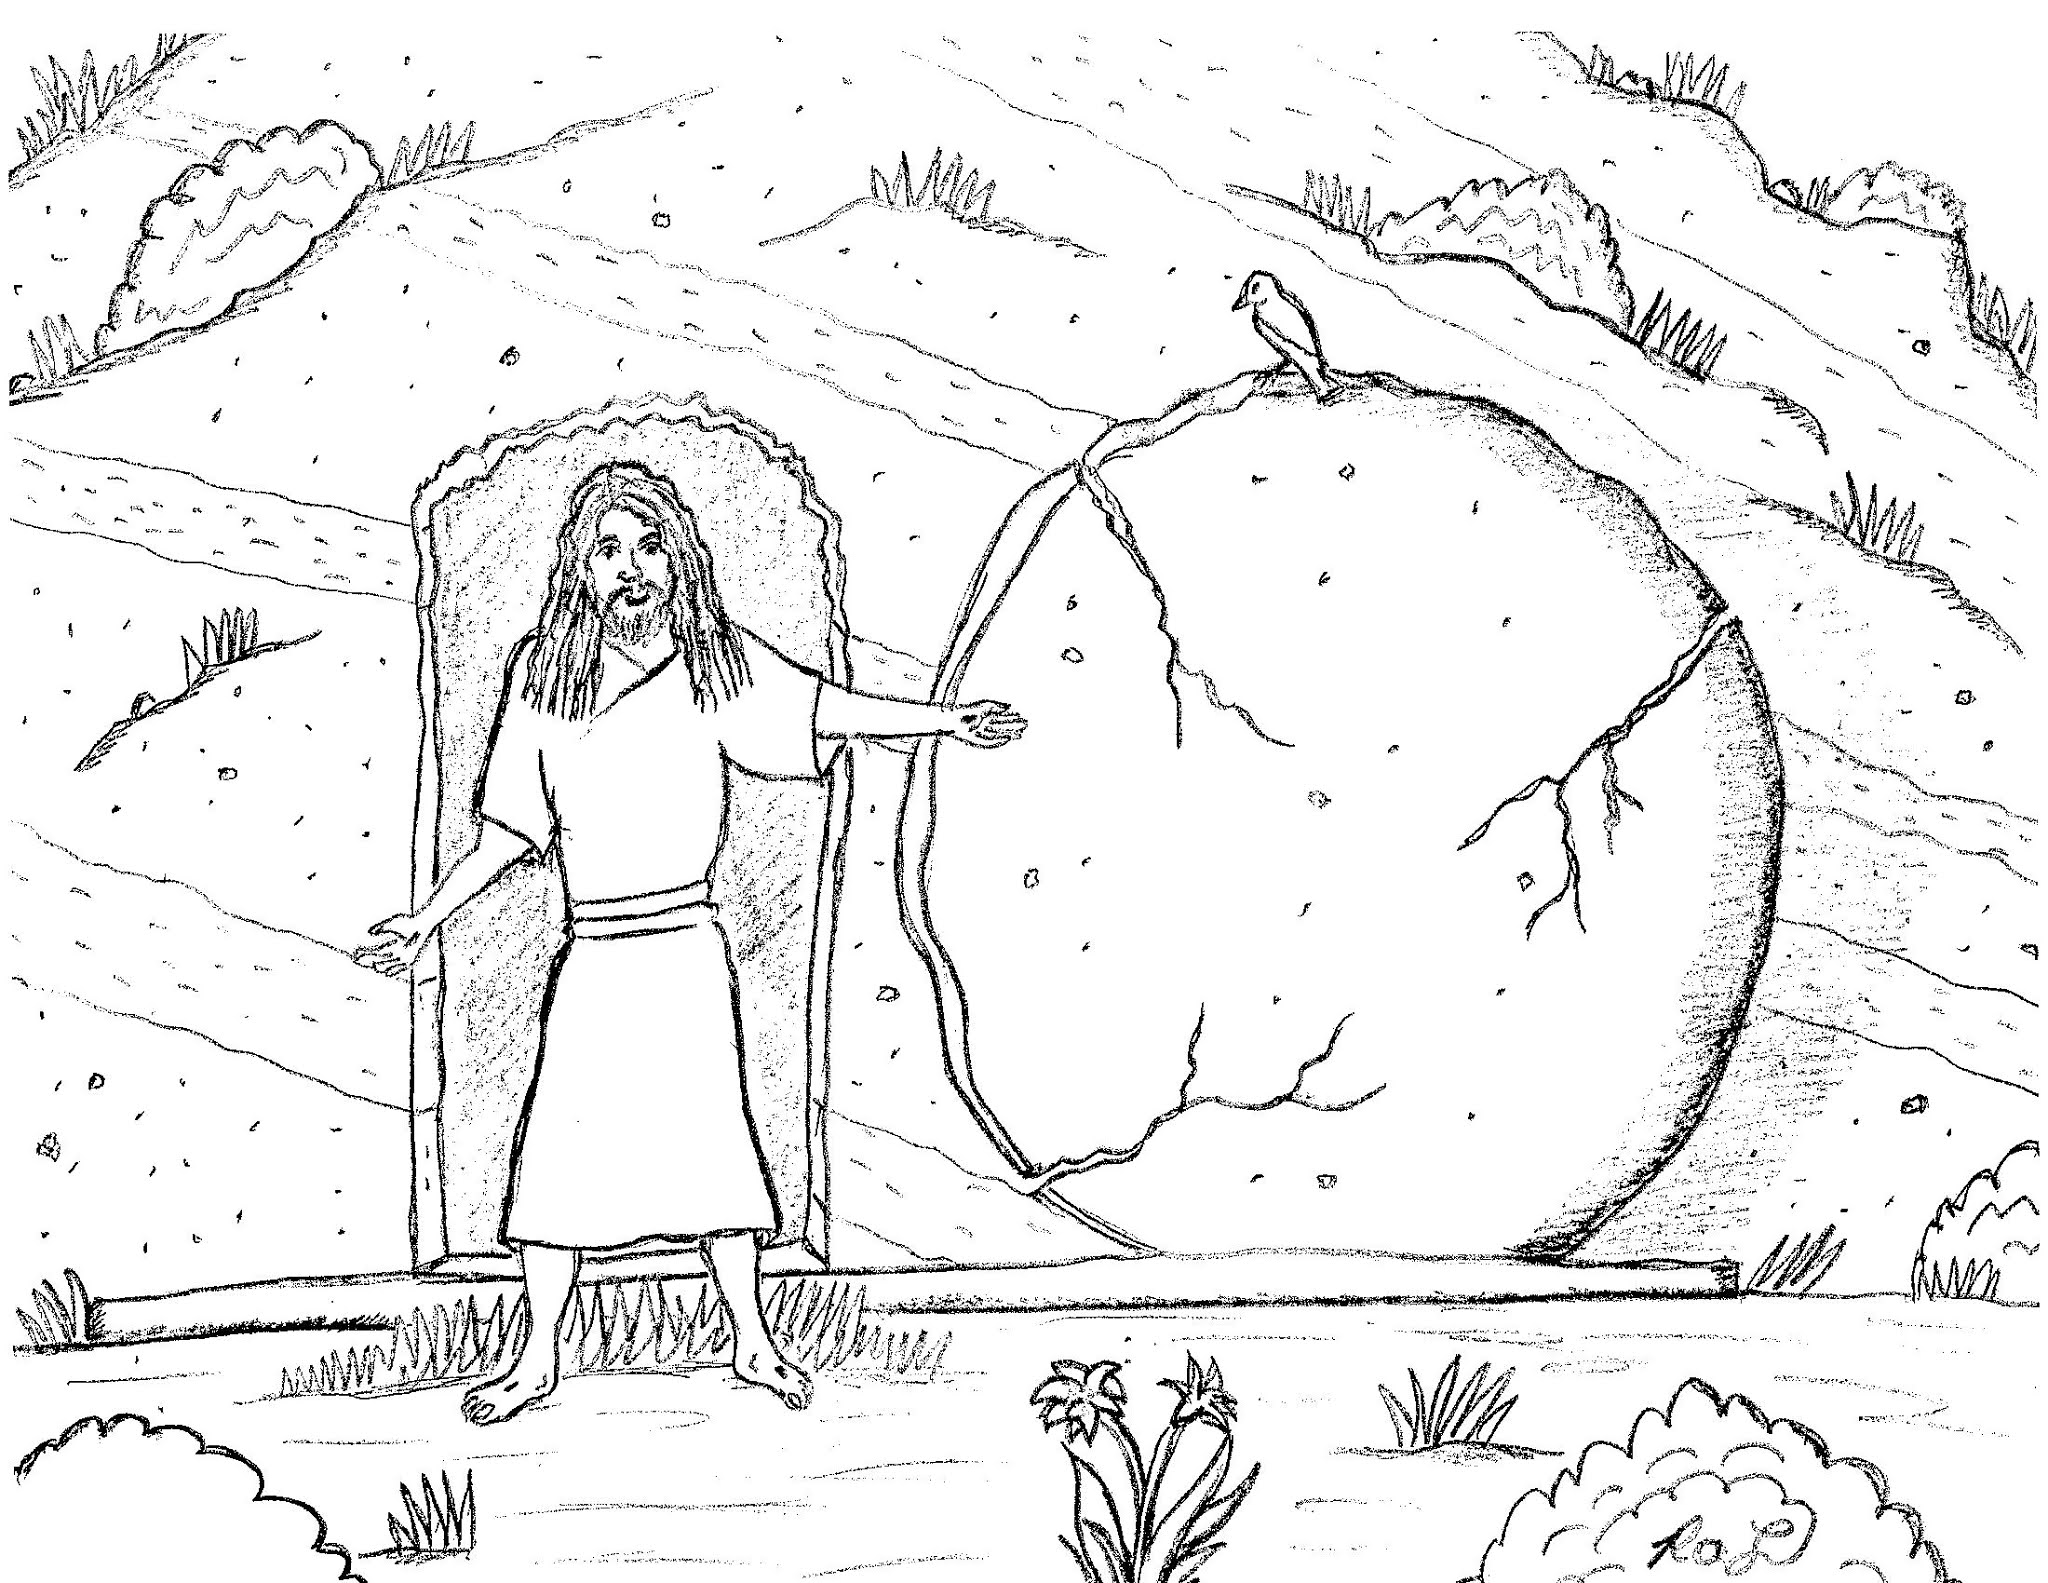 Robin's Great Coloring Pages: Resurrection of Jesus coloring pages for